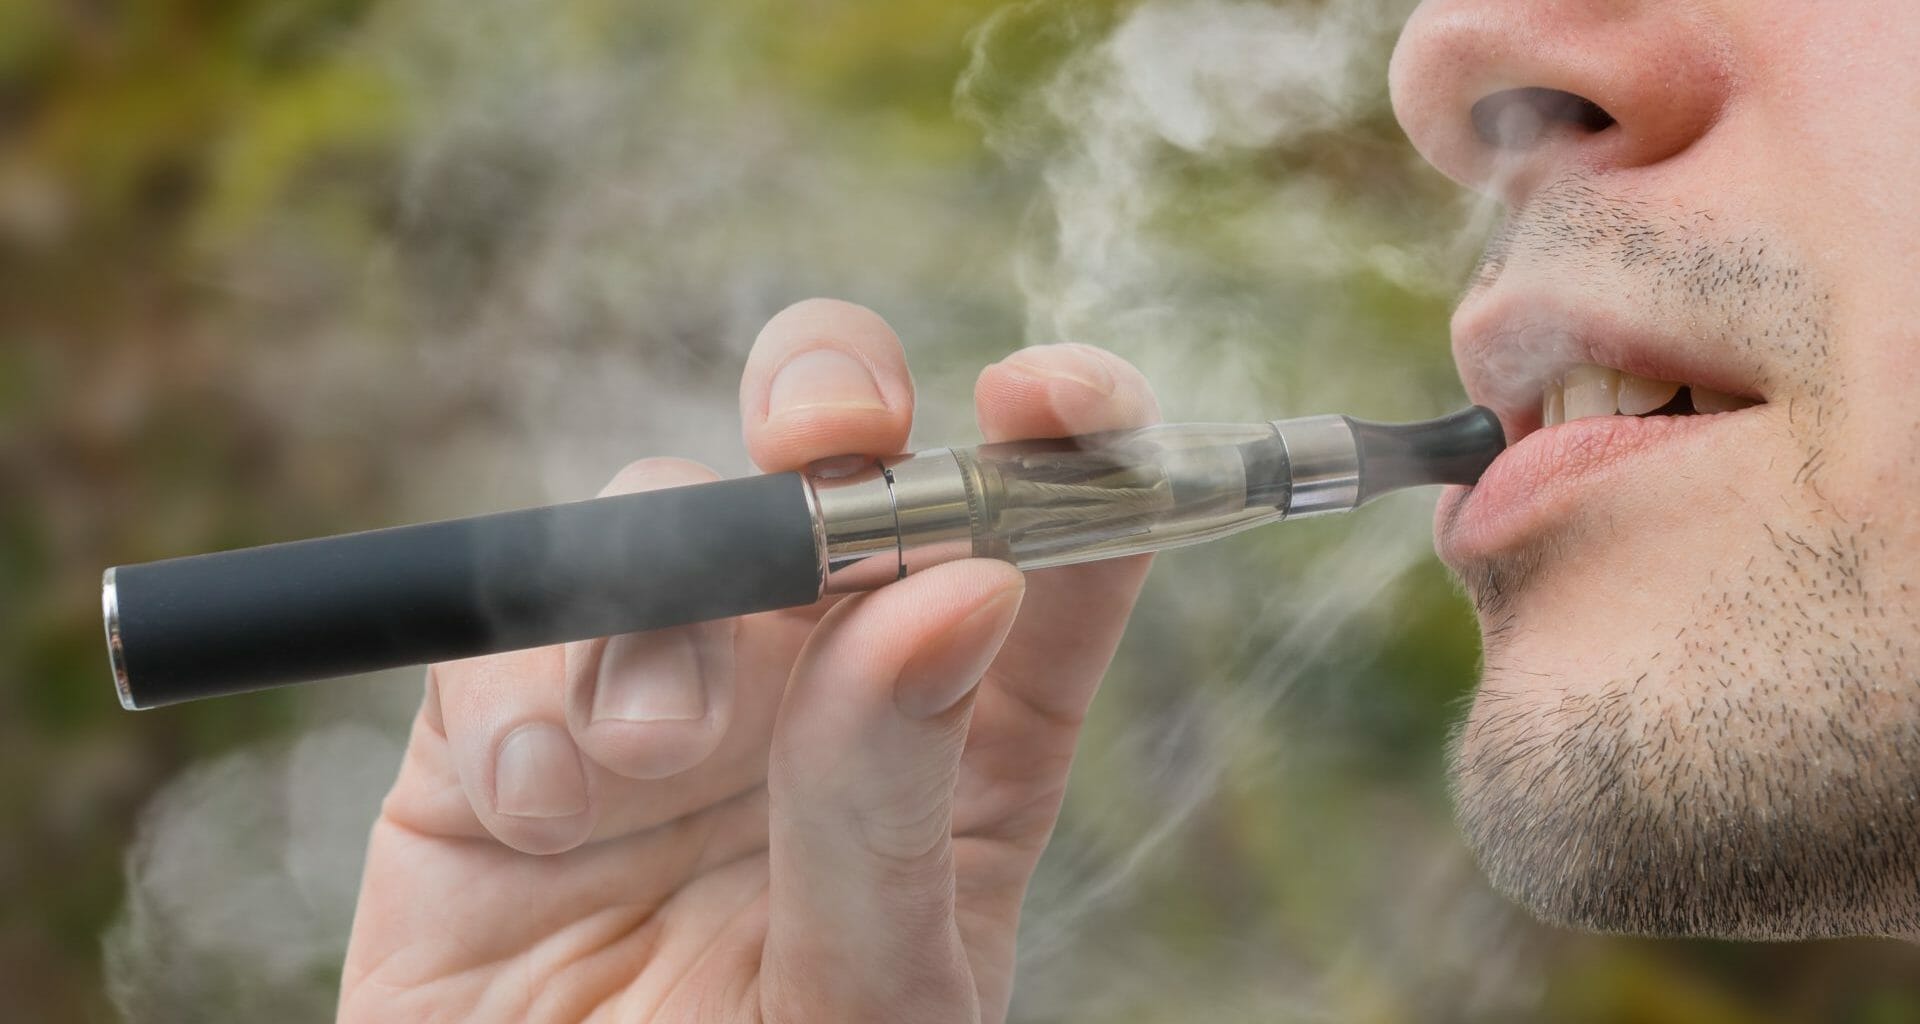 Facebook campaigns opposing anti-vaping laws prompt concern 3